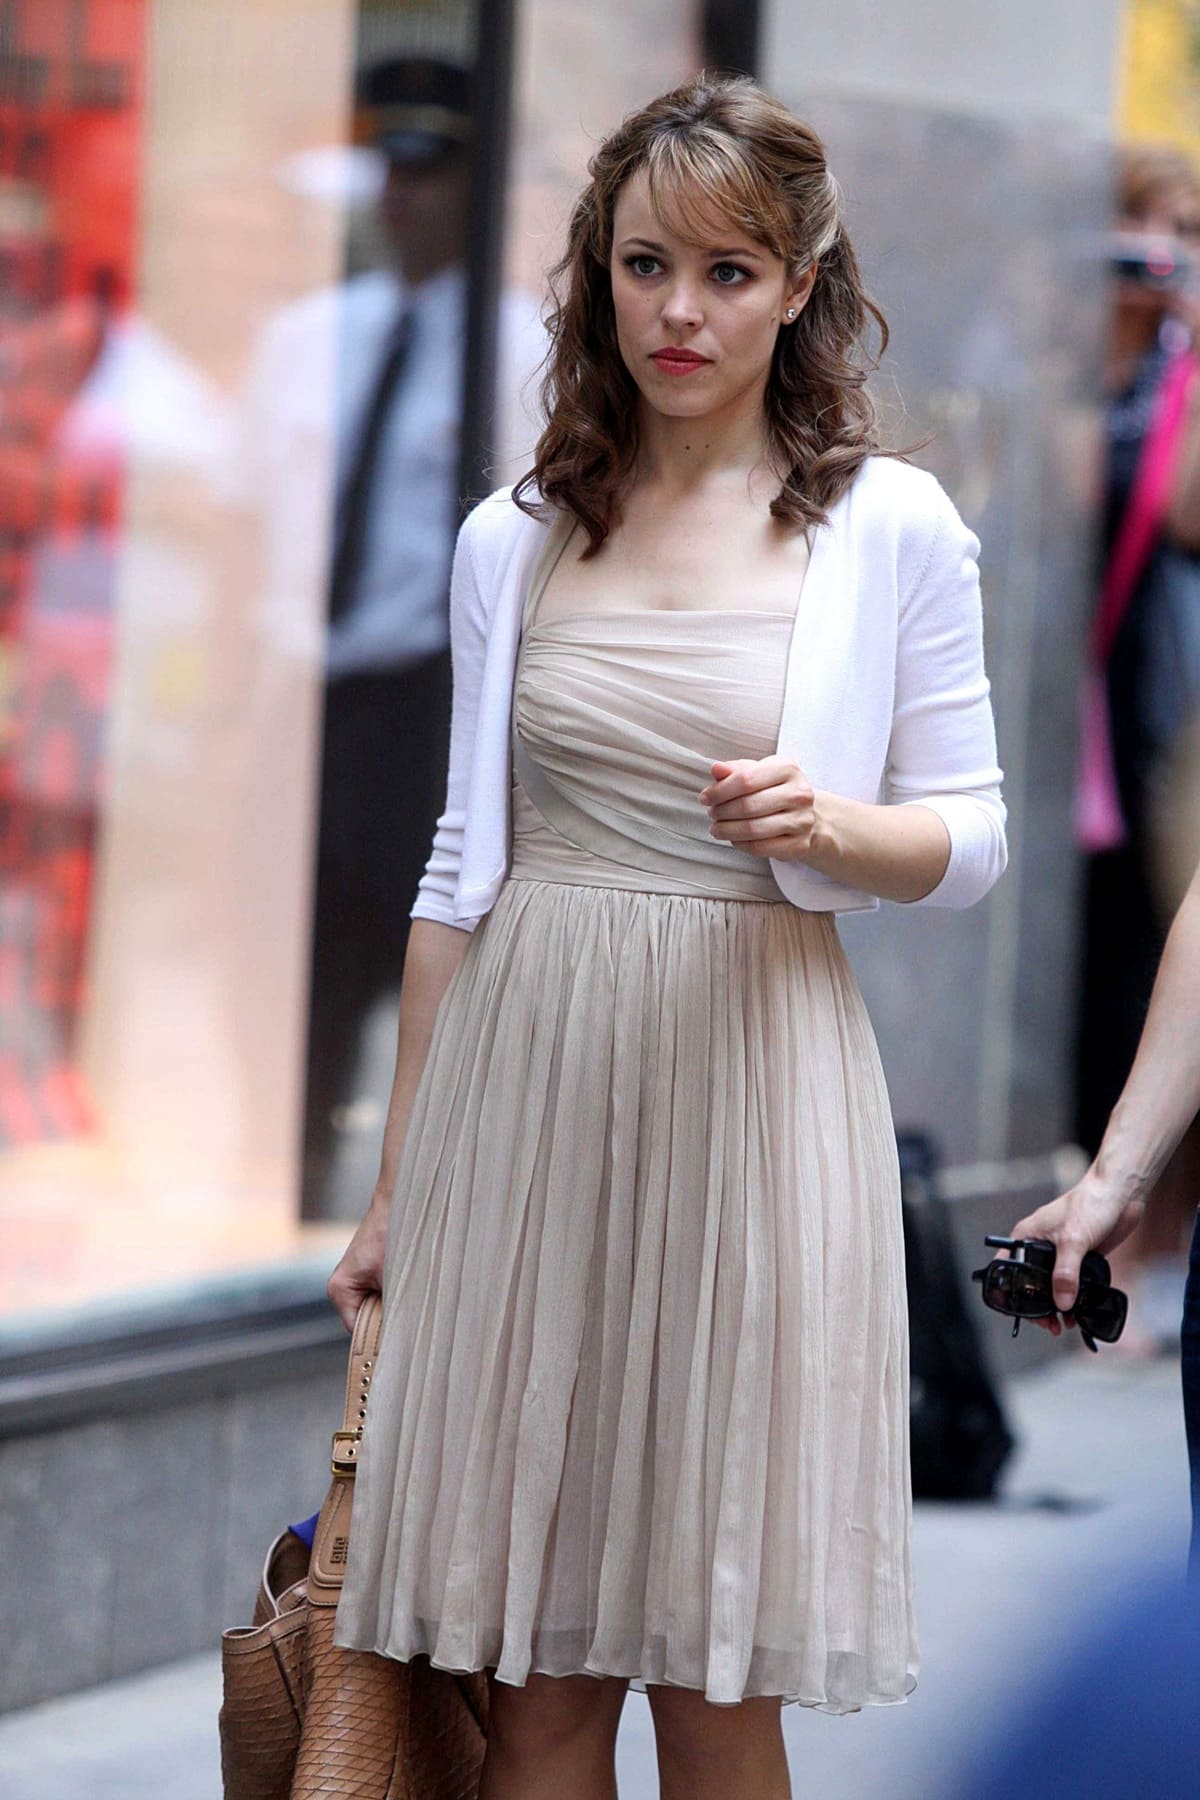 Rachel McAdams as Becky Fuller, the new executive producer of DayBreak, filming Morning Glory on the streets of Manhattan